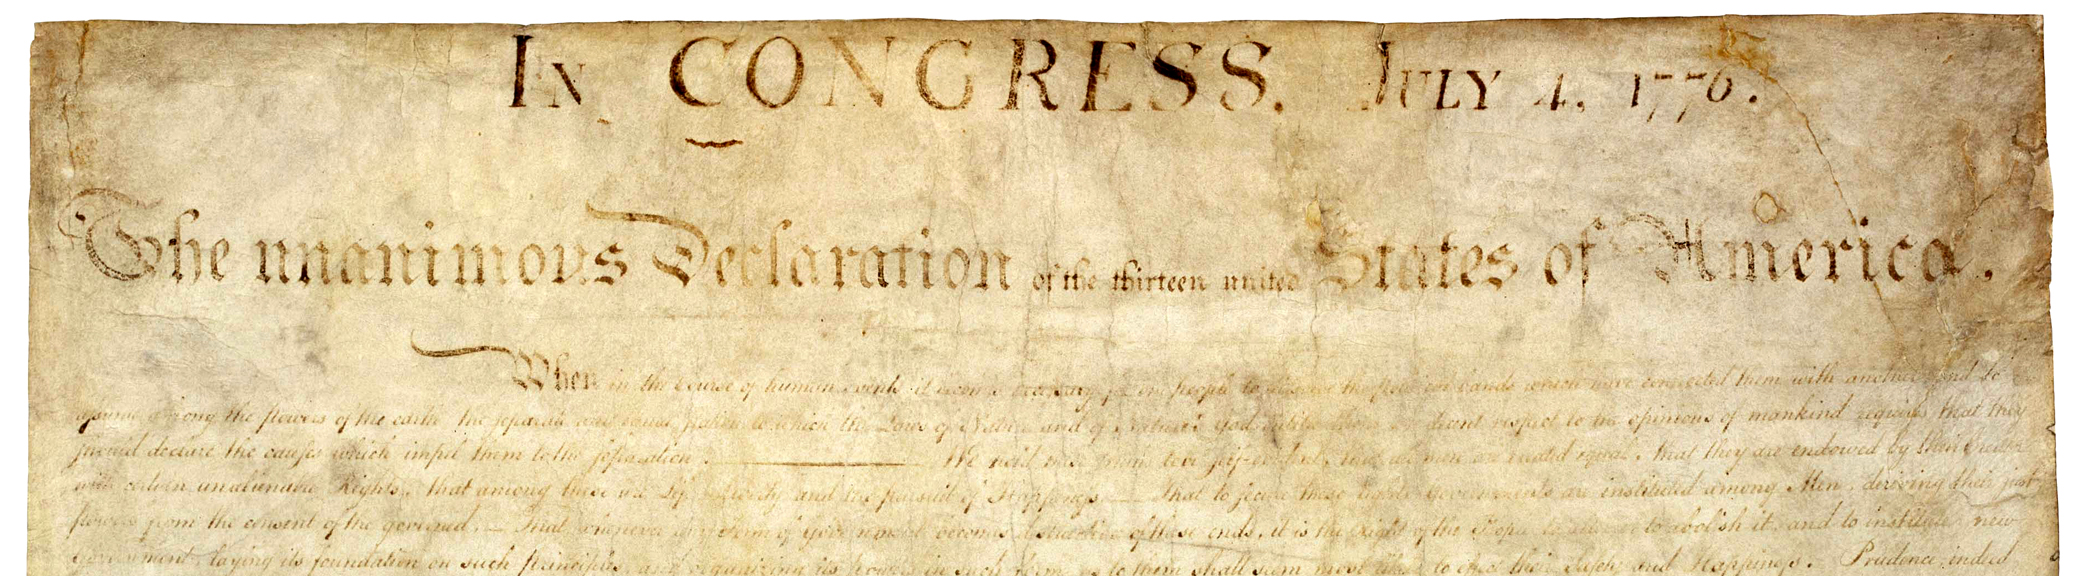 Our Favorite Quotations About the Declaration of Independence